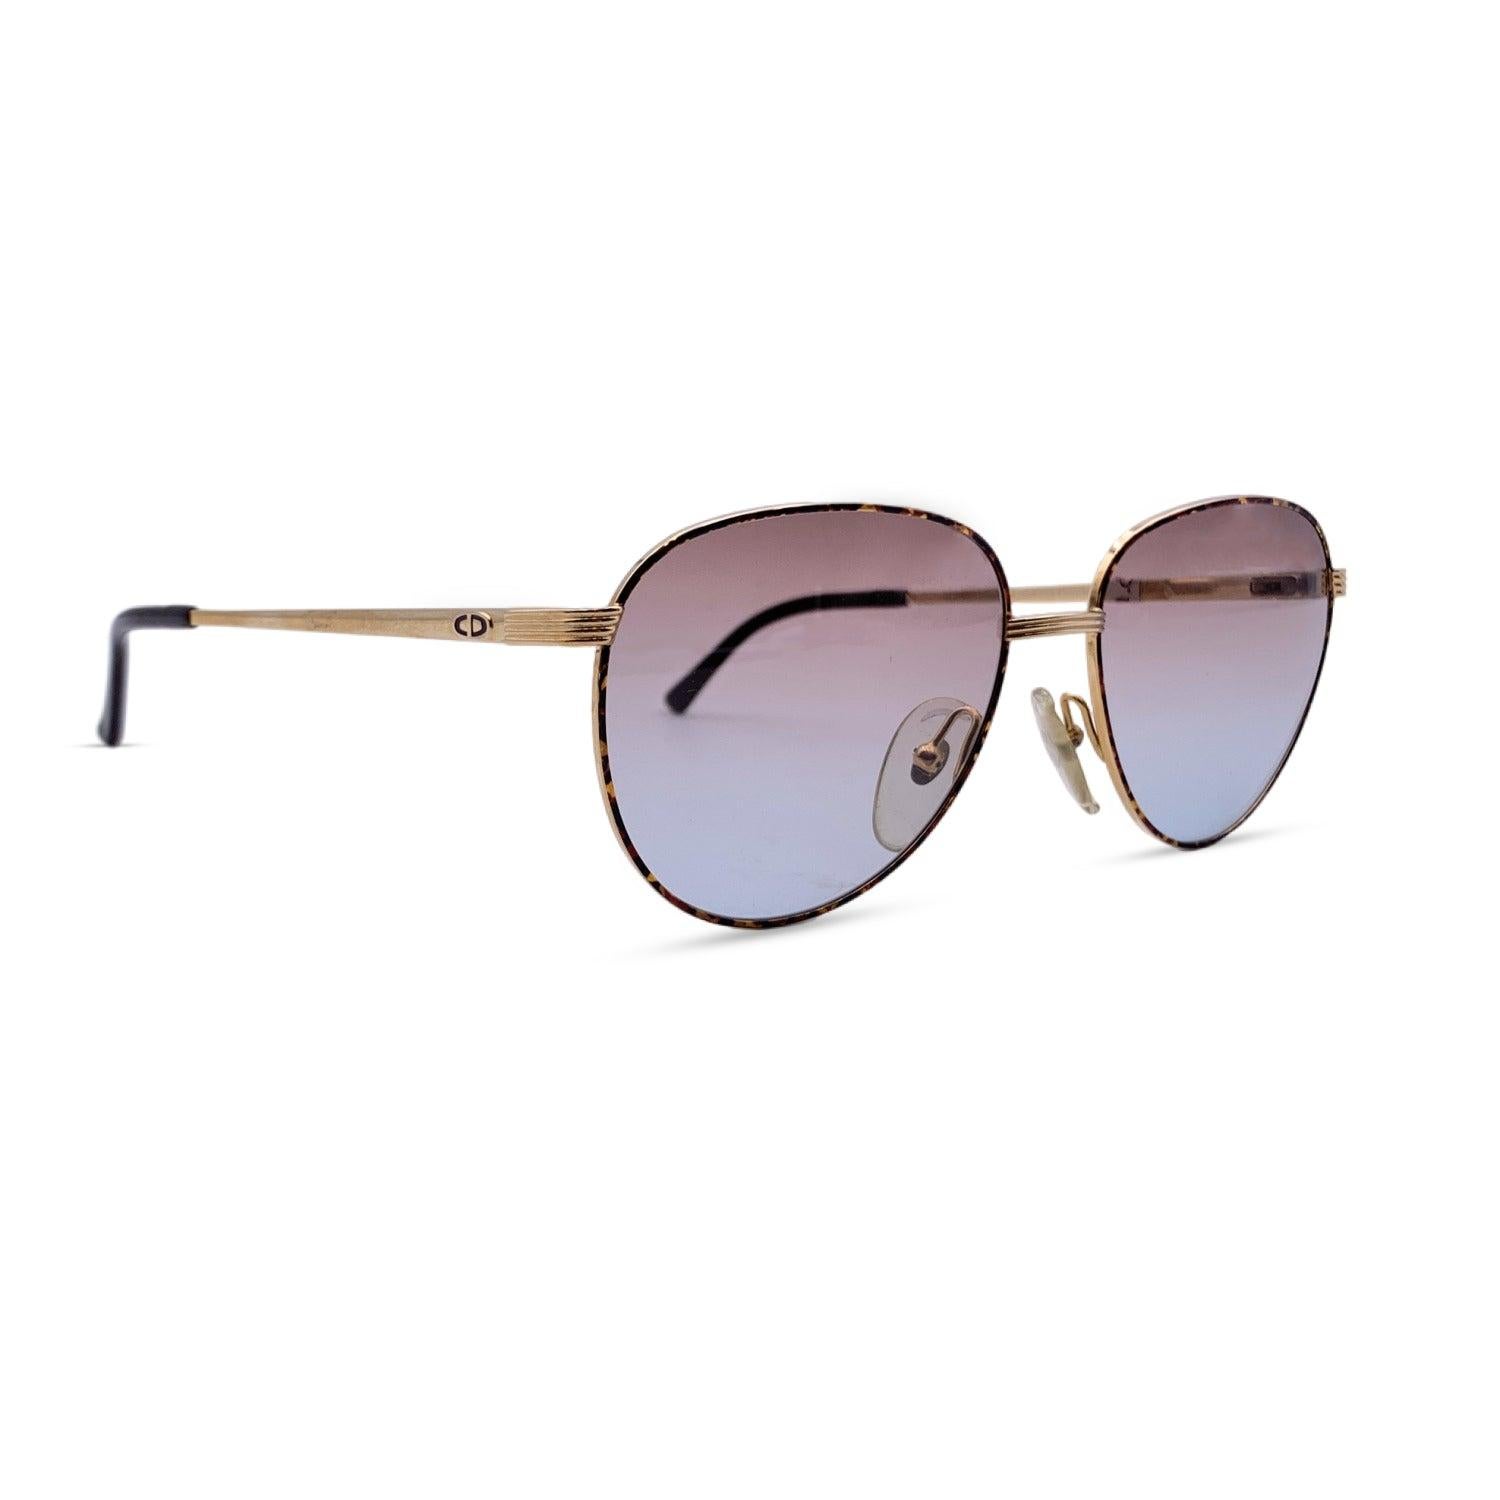 Vintage Christian Dior Women Sunglasses, Mod. 2754 41. Size: 55/17 140mm. Browned Gold frame , with CD logo on temples. 100% Total UVA/UVB protection. Brown gradient lenses, shades of lenses from brown to blue. Details MATERIAL: Metal COLOR: Gold